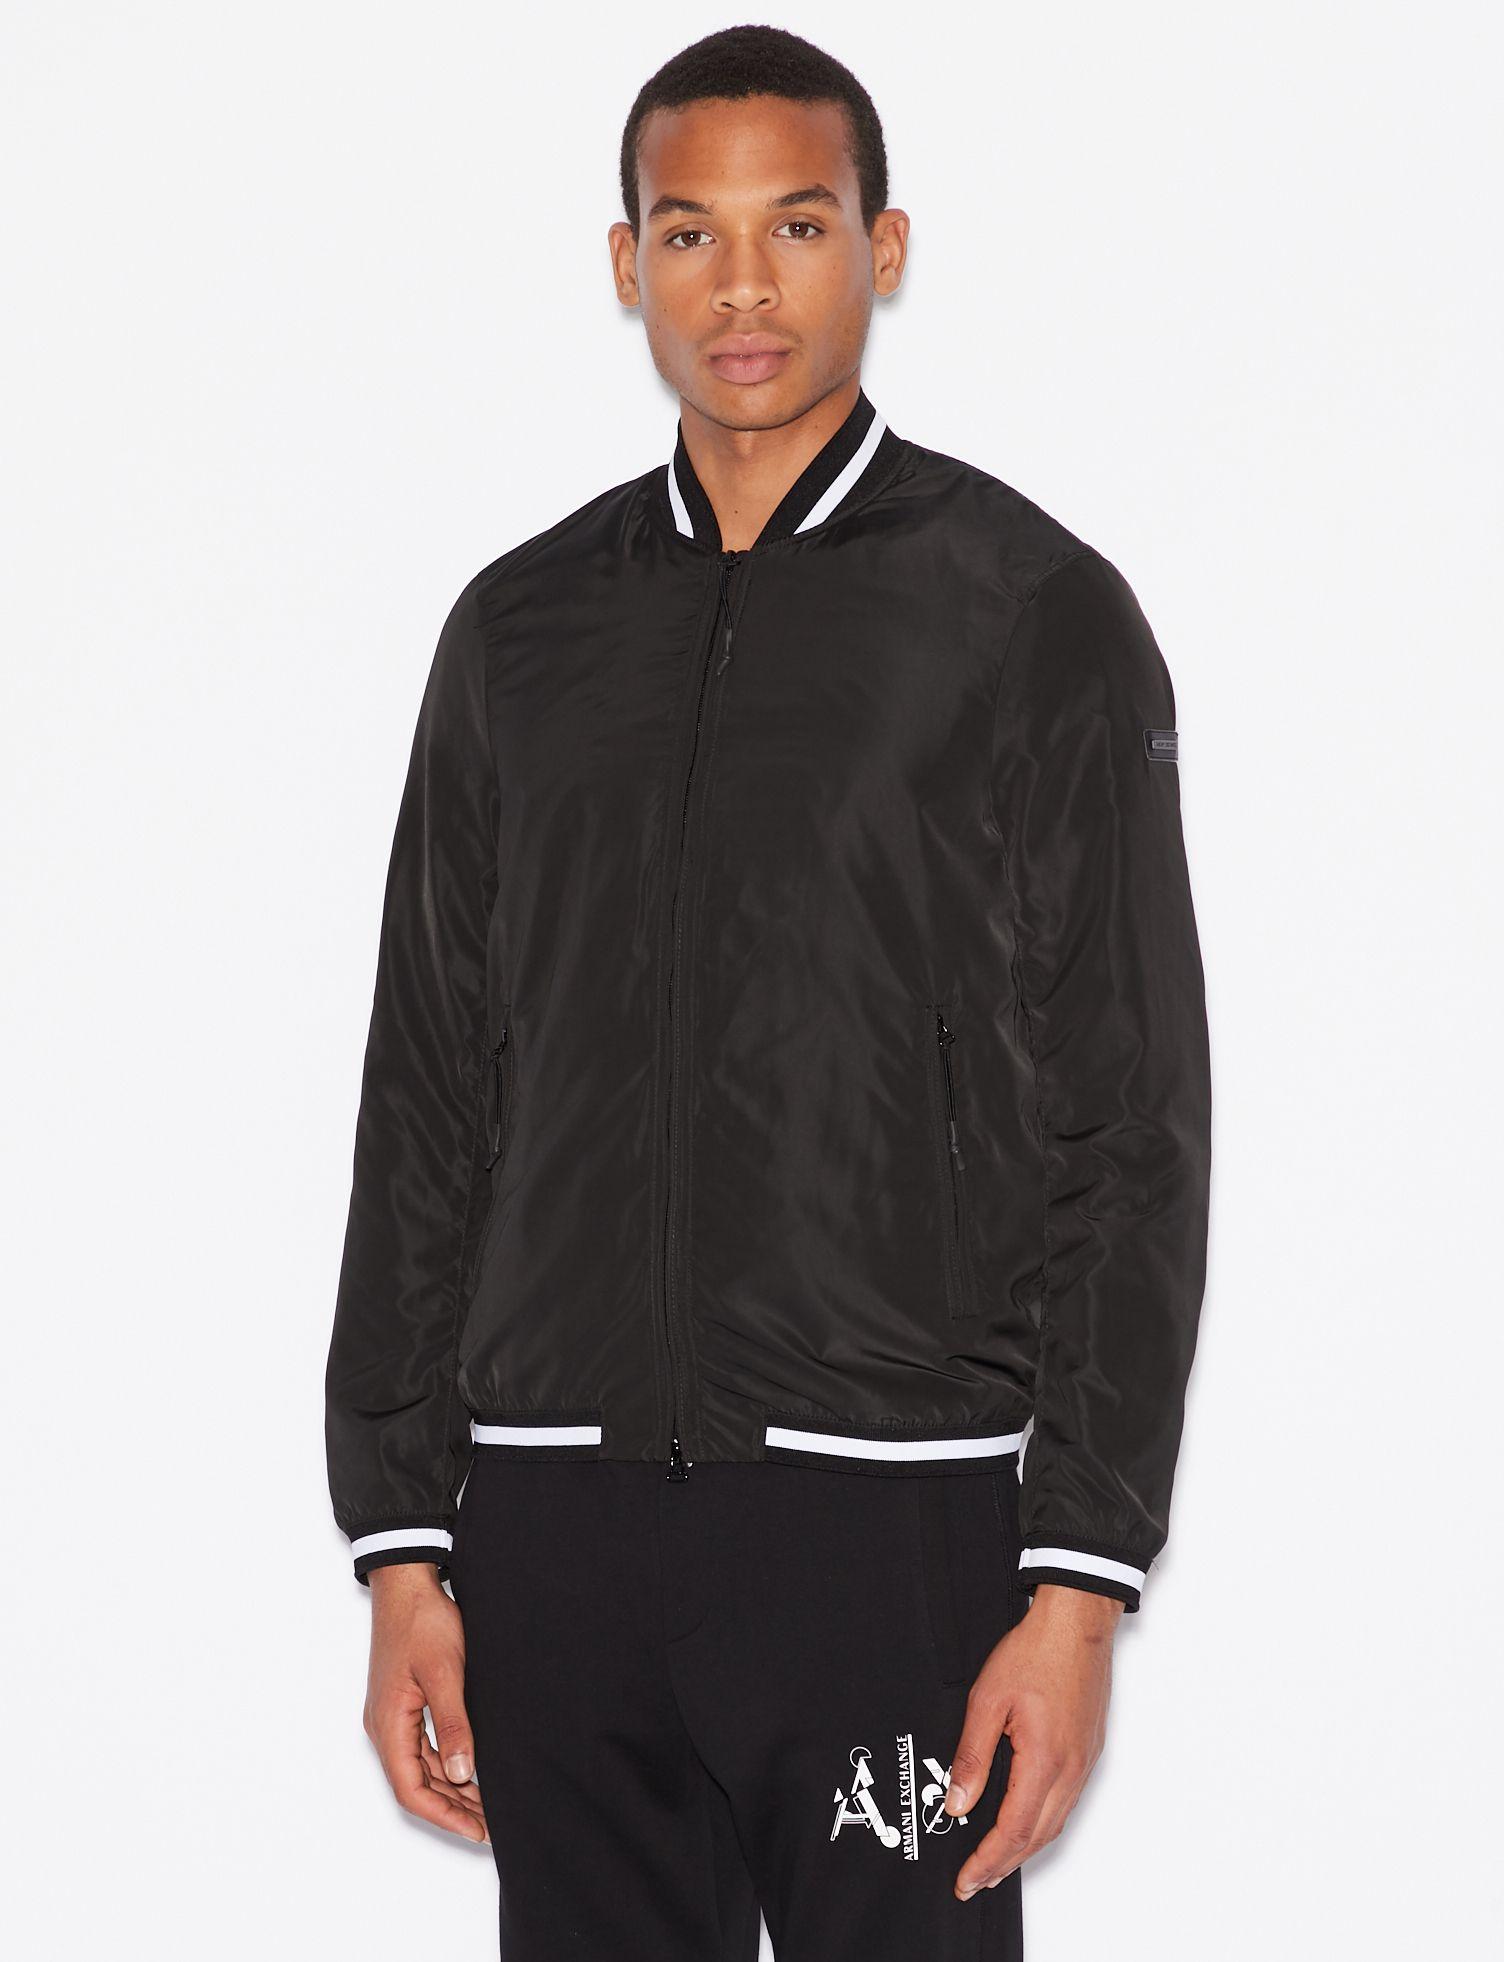 Armani Exchange Synthetic Knit-trim Bomber Jacket in Black for Men - Lyst